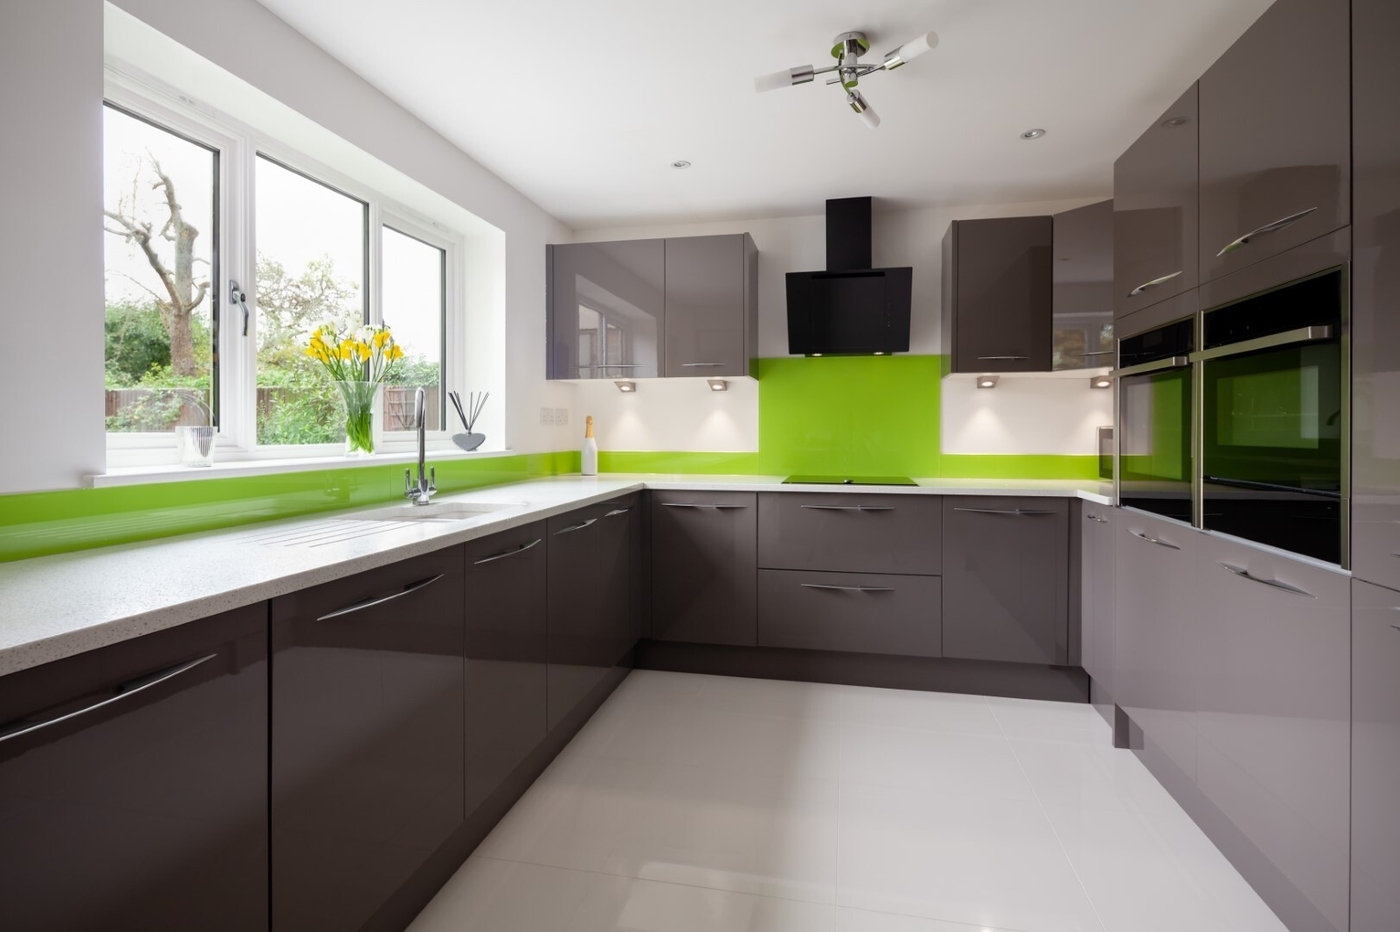 Lime Green Color – What Colors Go With Lime Green?